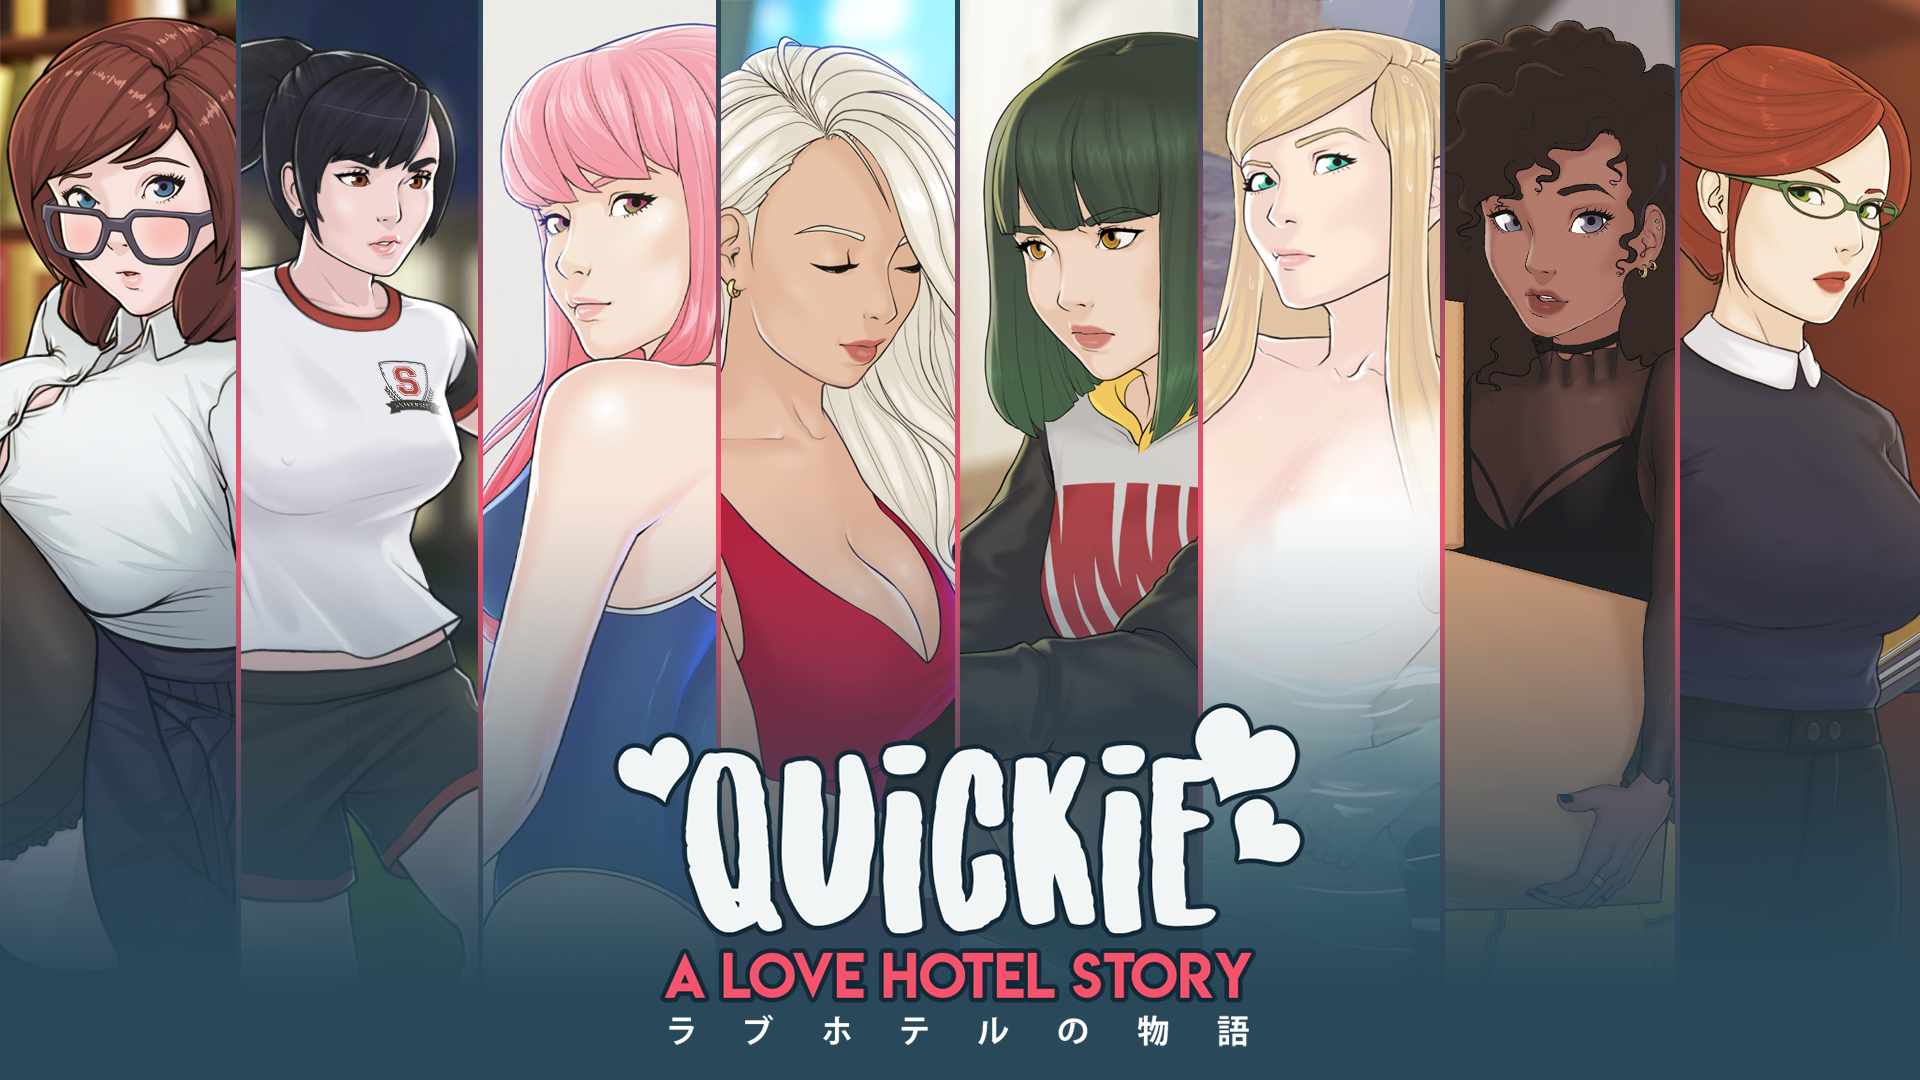 Quickie a love hotel story